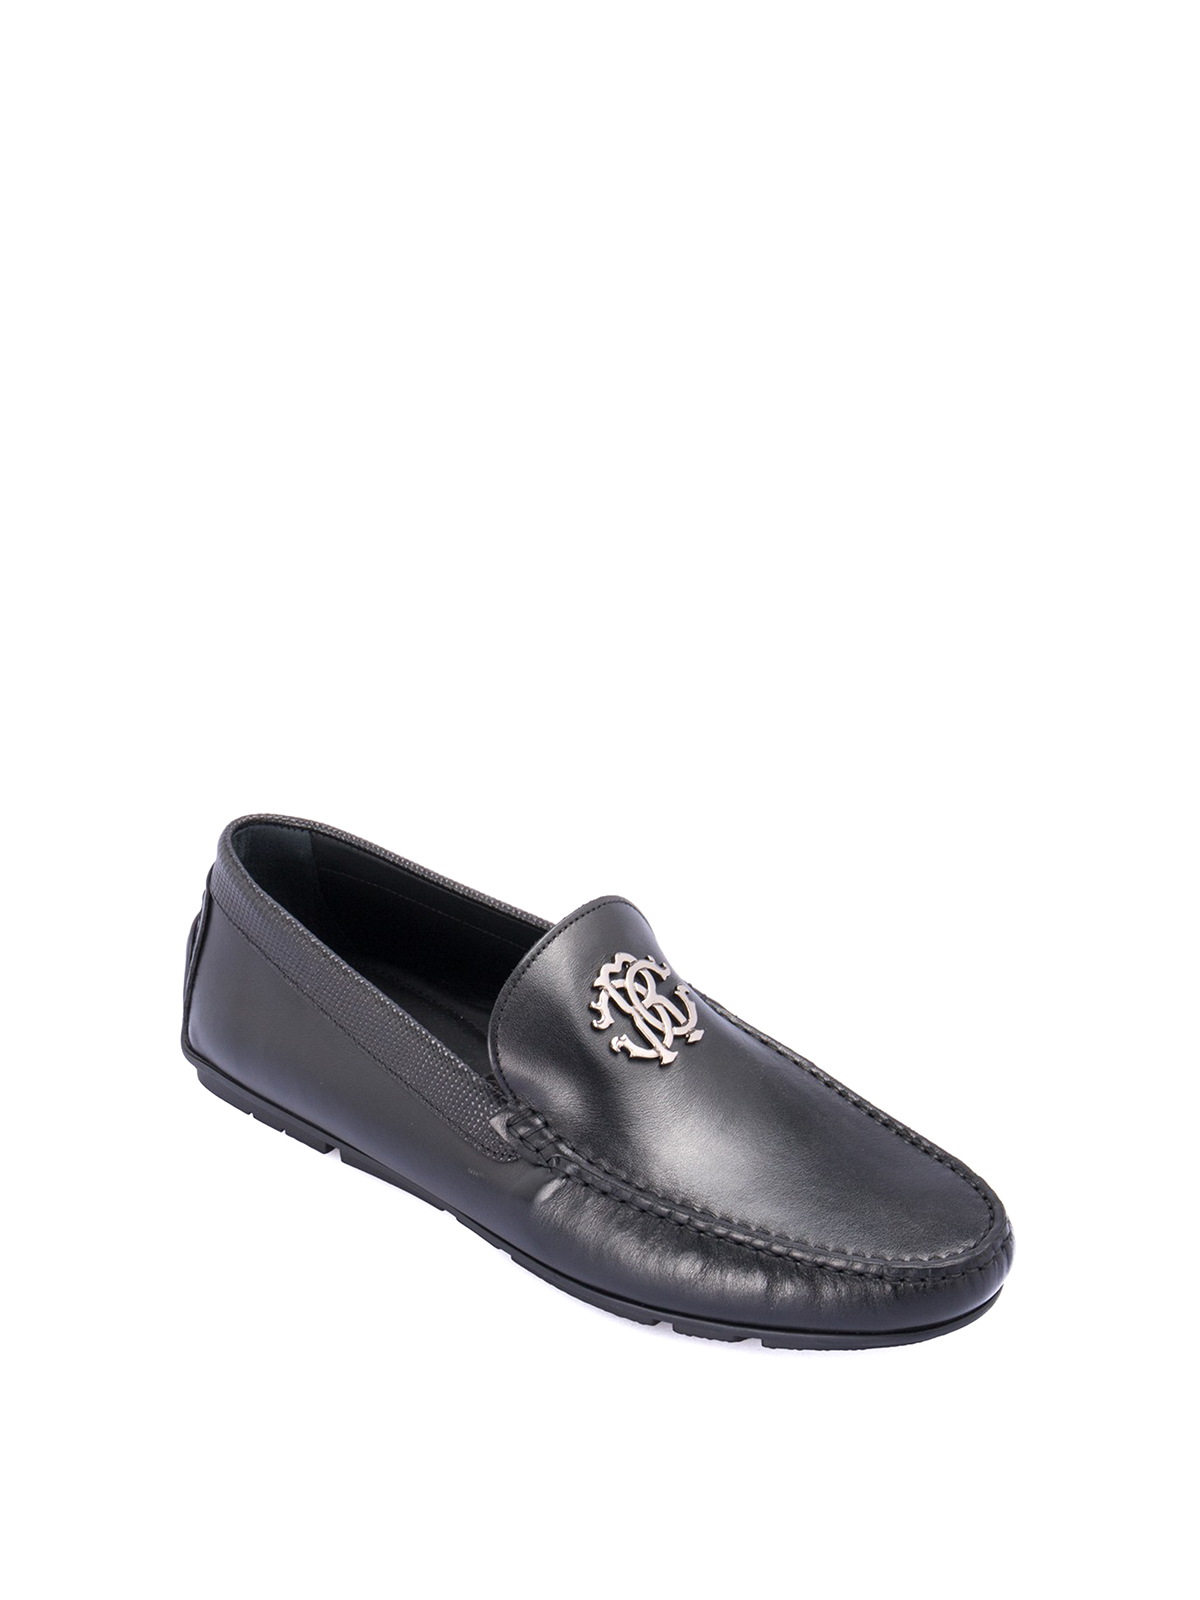 Roberto Cavalli - Leather loafers - Loafers & Slippers - 3230A | iKRIX.com